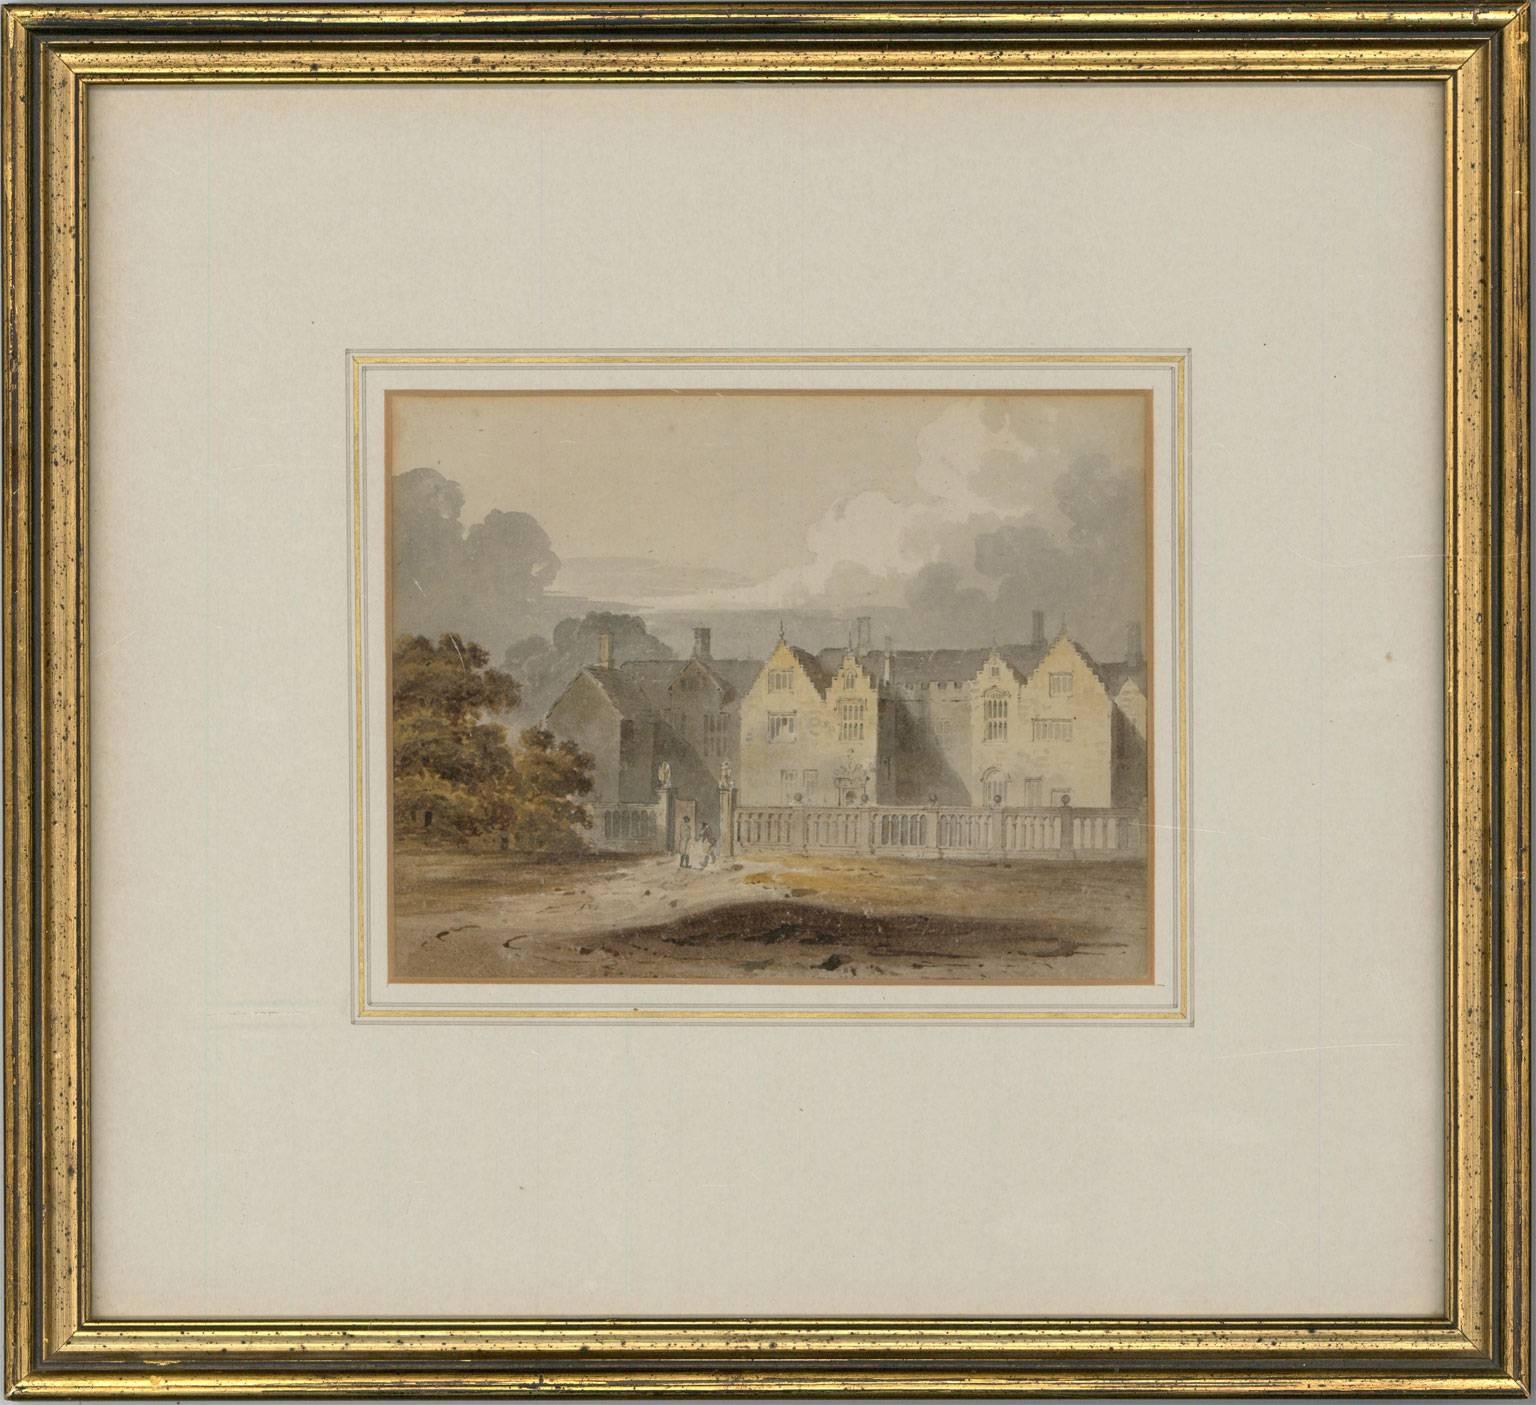 Attributed to John Chessell Buckler (1793-1894) - English Watercolour,